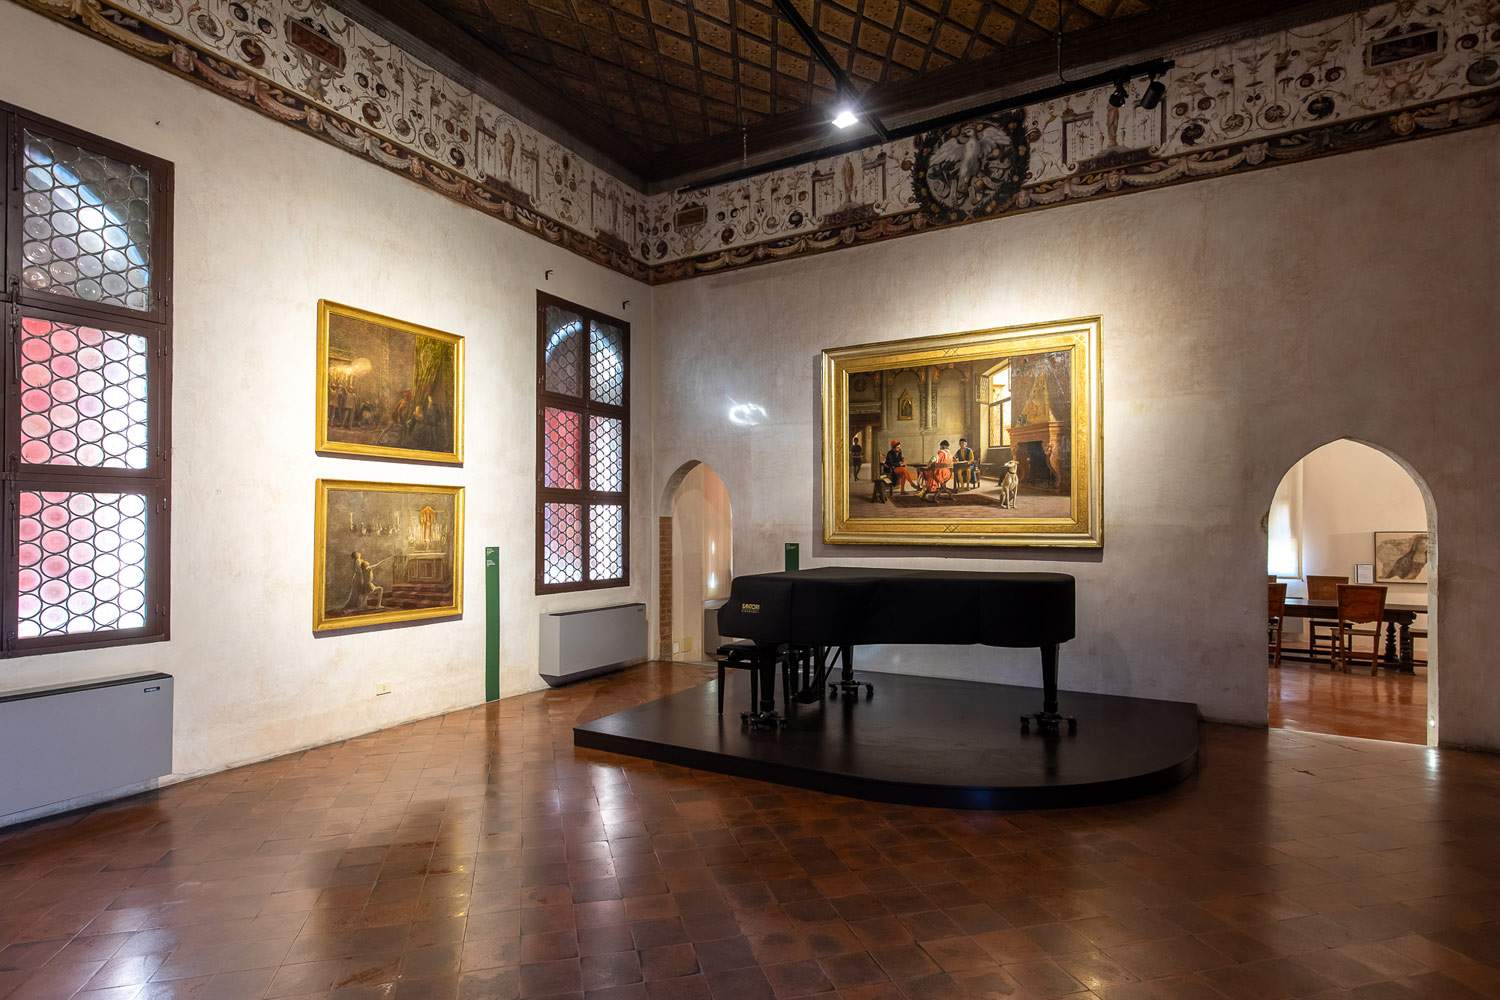 Ferrara, 37 selected works from the Assicoop Collection in a three-year display